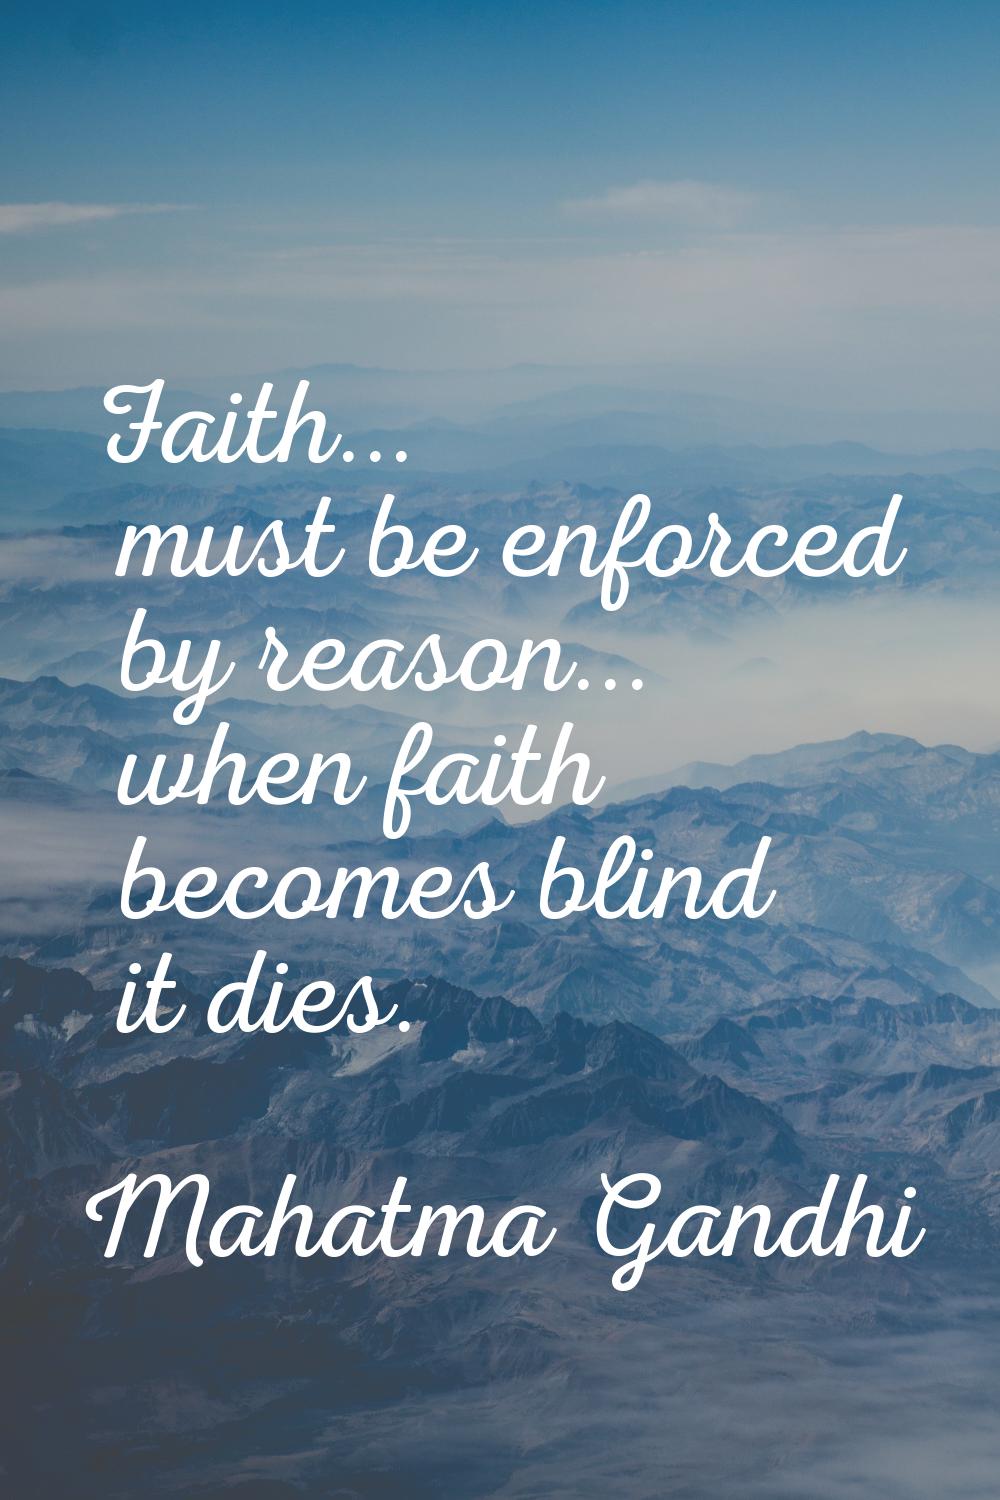 Faith... must be enforced by reason... when faith becomes blind it dies.